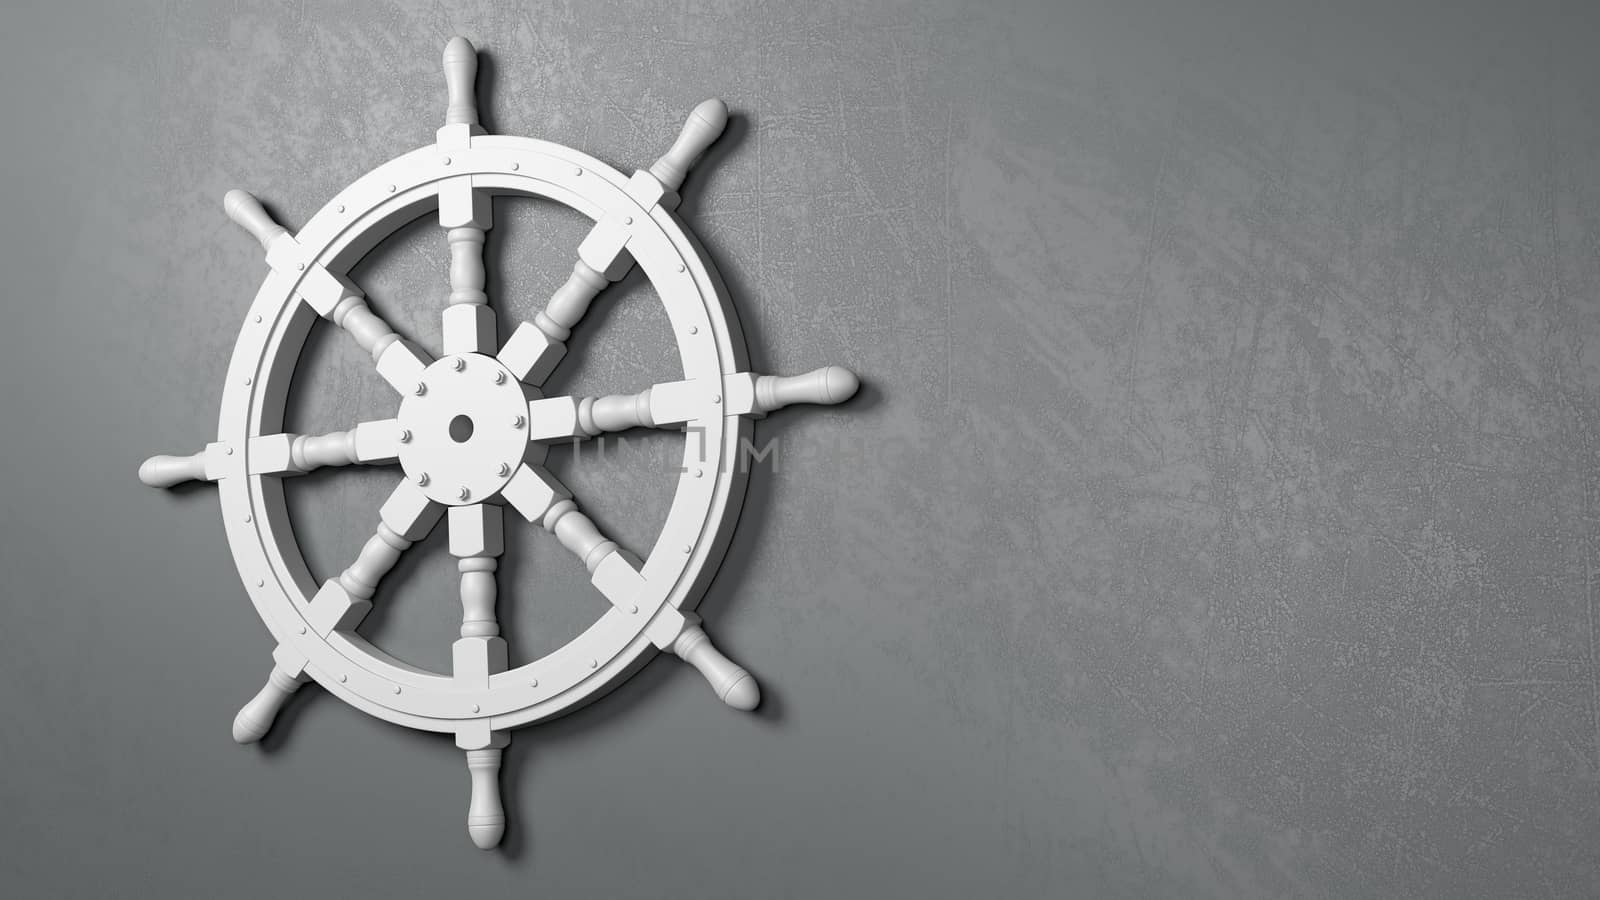 Boat Rudder Wheel Against a Gray Wall by make